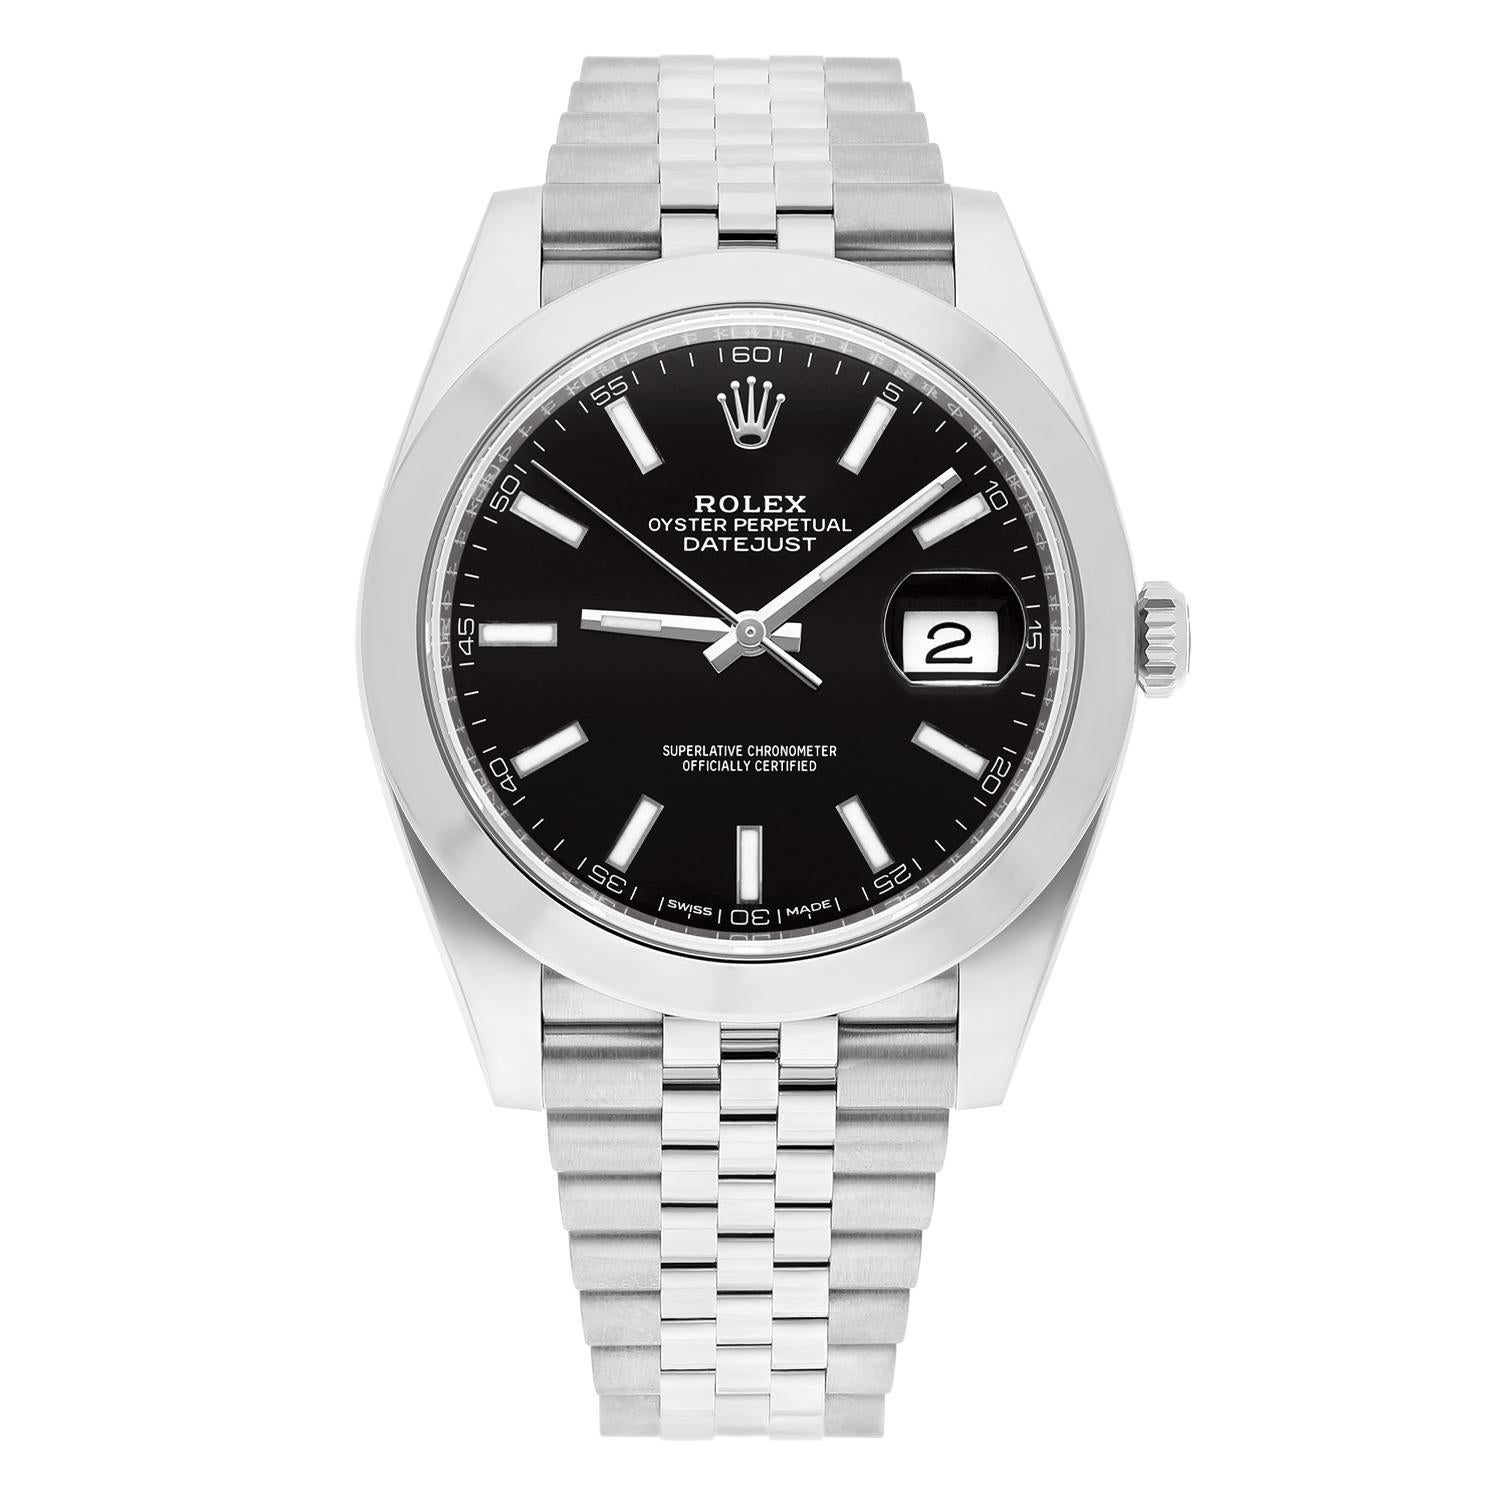 Rolex Datejust 41 Steel Black Index Dial Mens Watch Jubilee Band 126300

This watch has been professionally polished, serviced and does not have any visible scratches or blemishes. 
It can easily pass as unworn. 
Sale comes with a Rolex box,